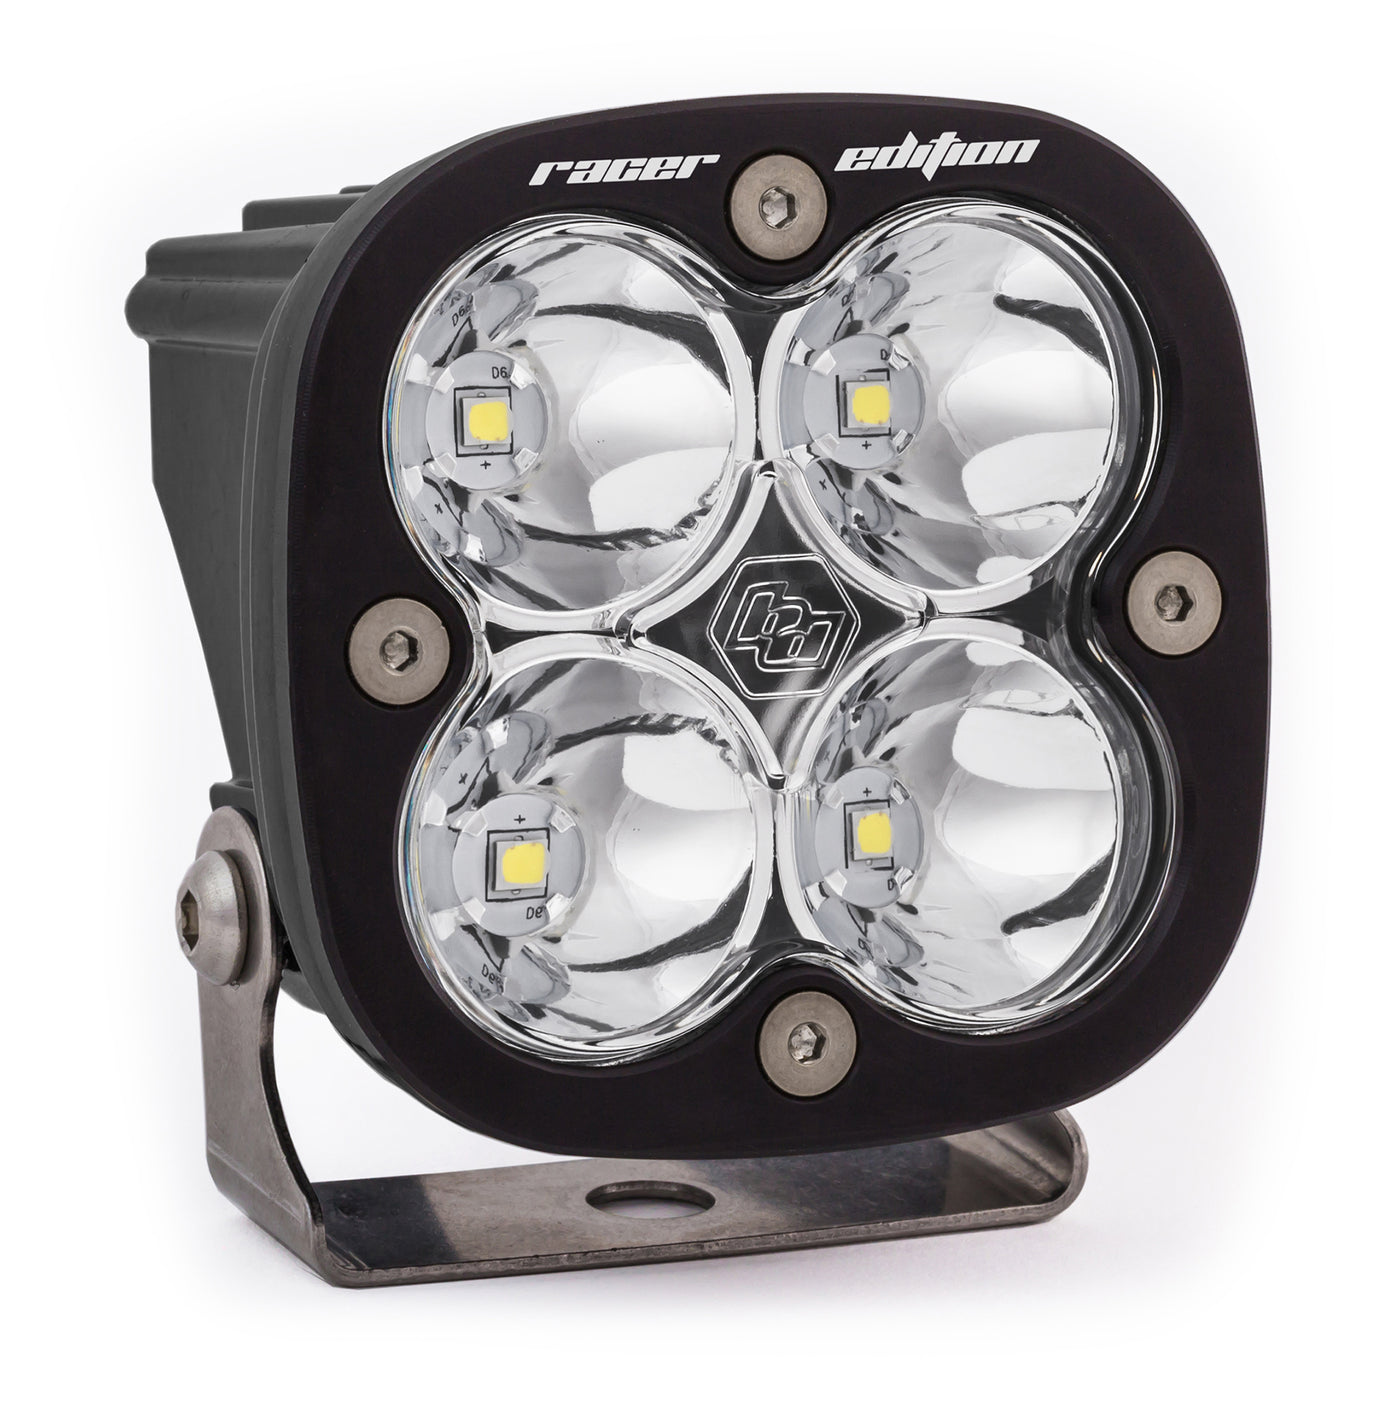 Squadron Racer Edition LED Auxiliary Light Pod - Universal